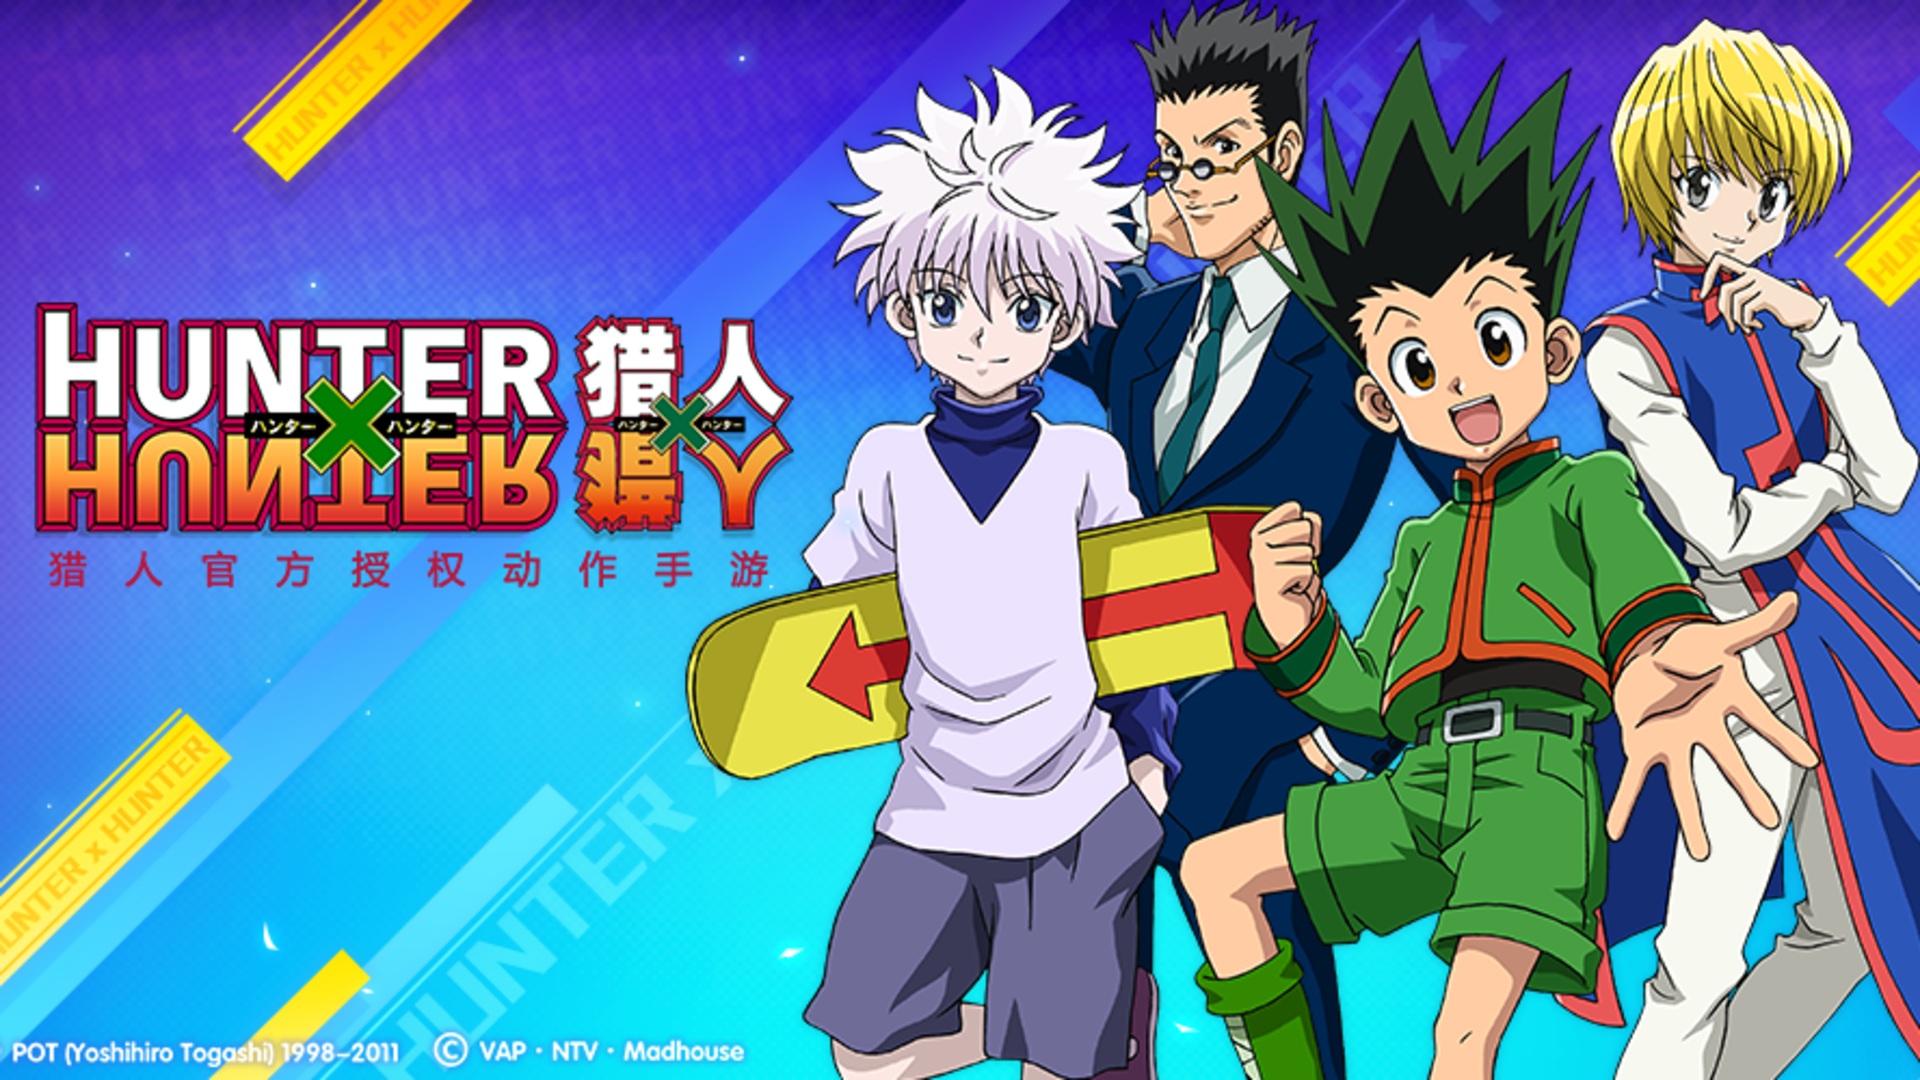 Hunter x Hunter Mobile - RPG CBT2 Gameplay (Android/iOS) 